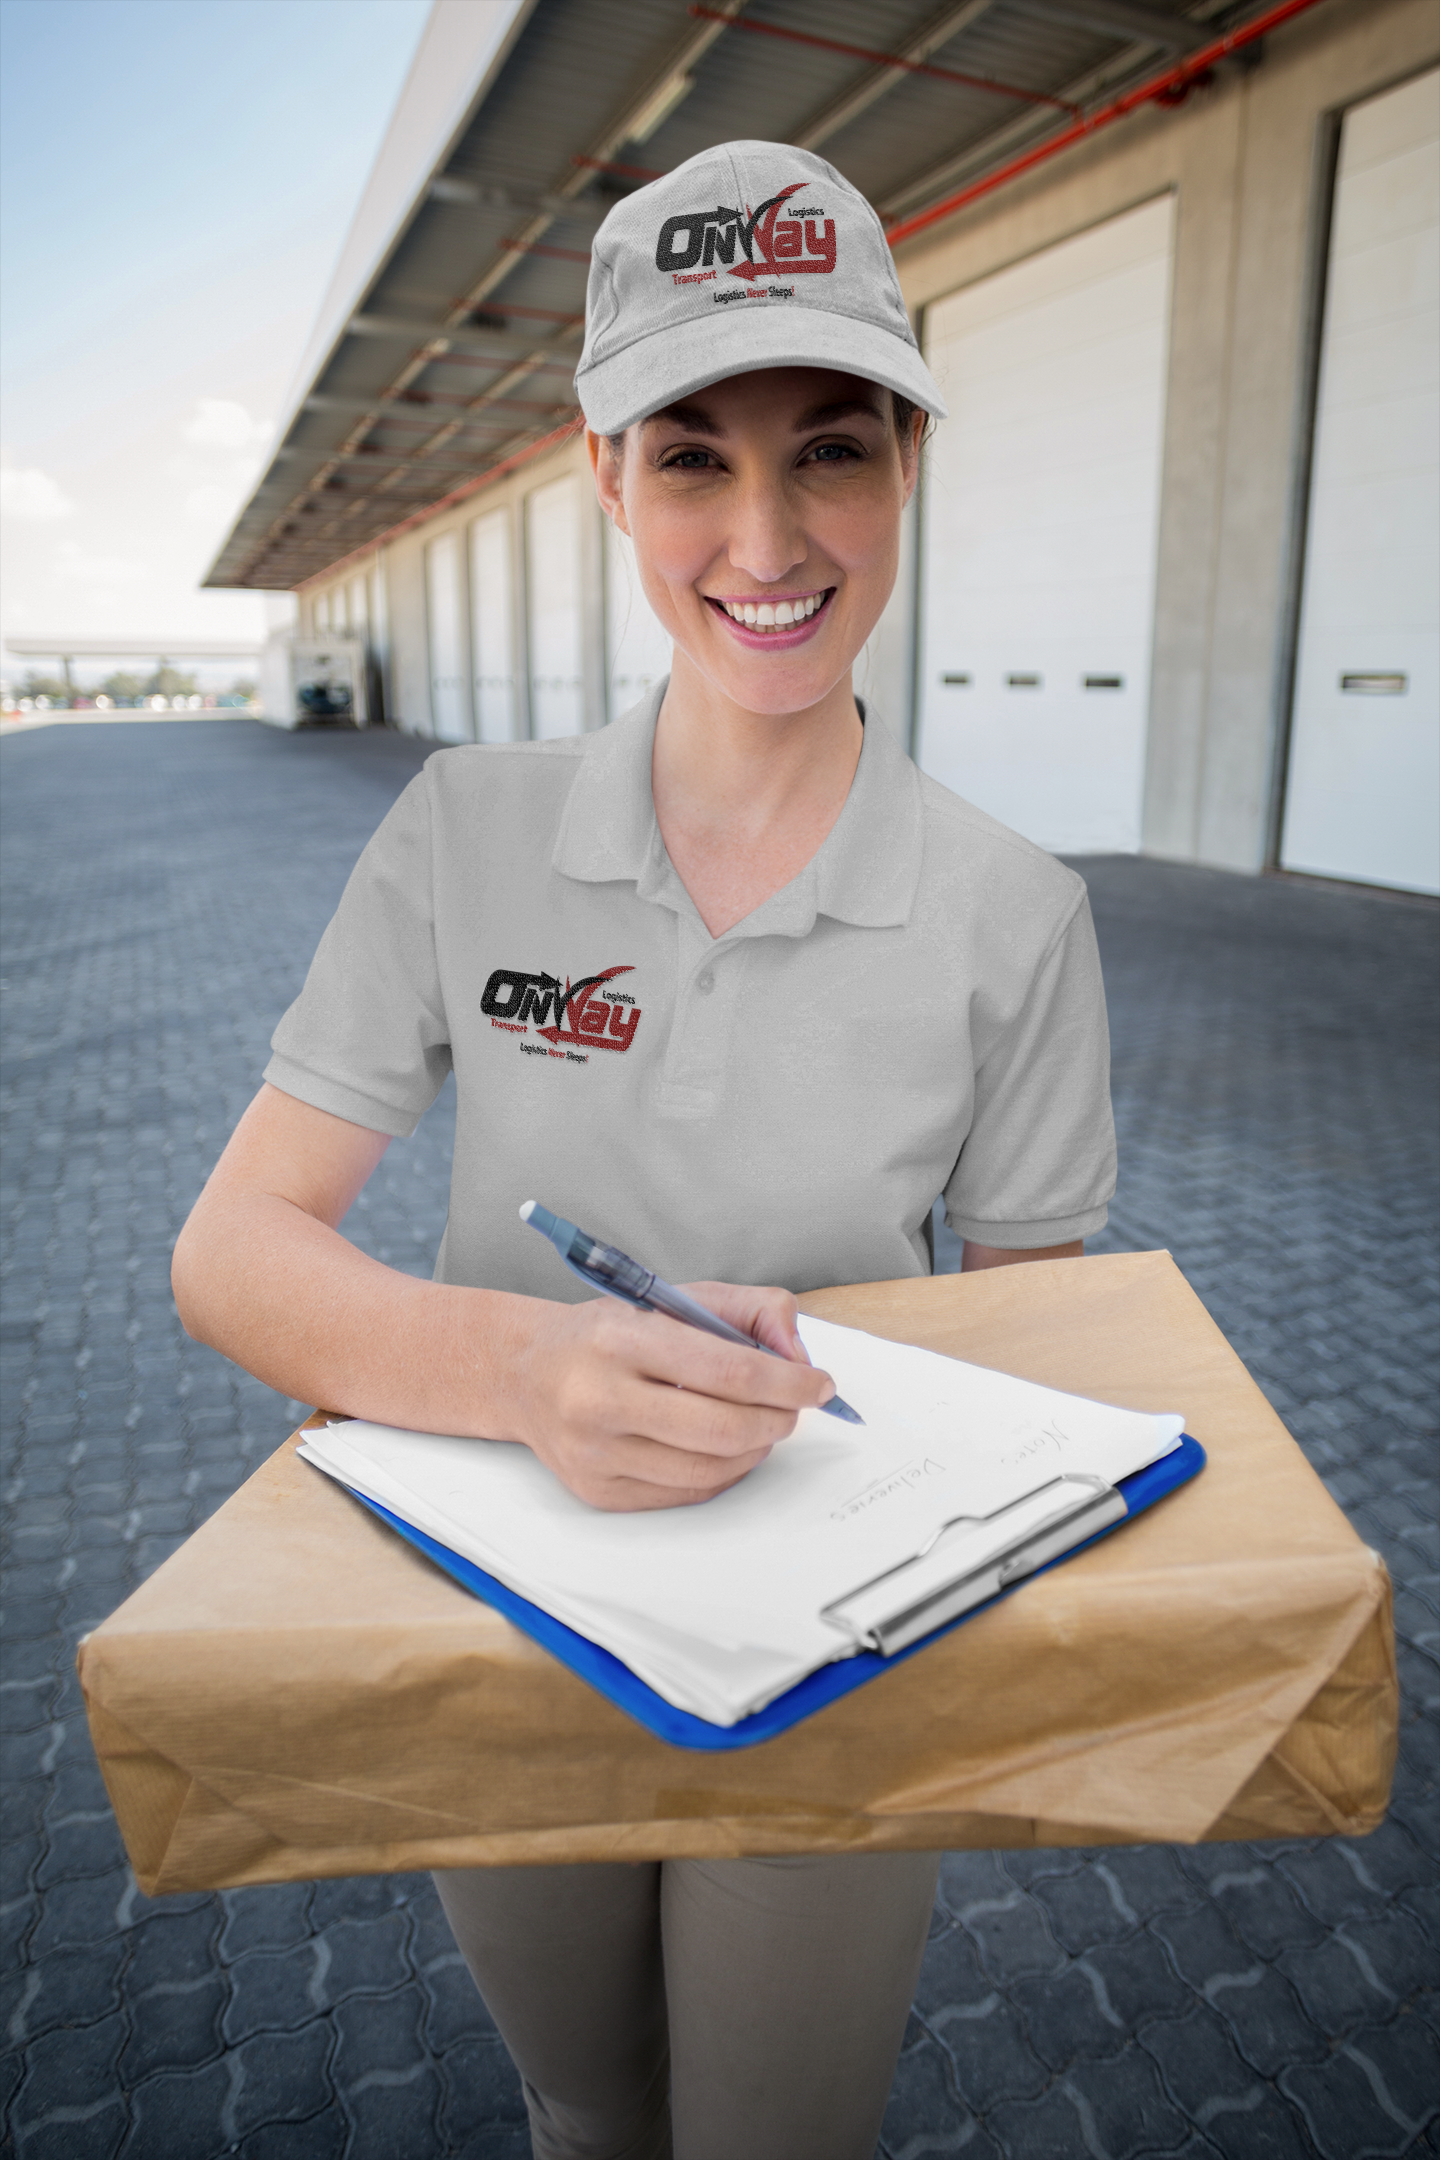 a delivery woman is smiling while holding a package and a clipboard .